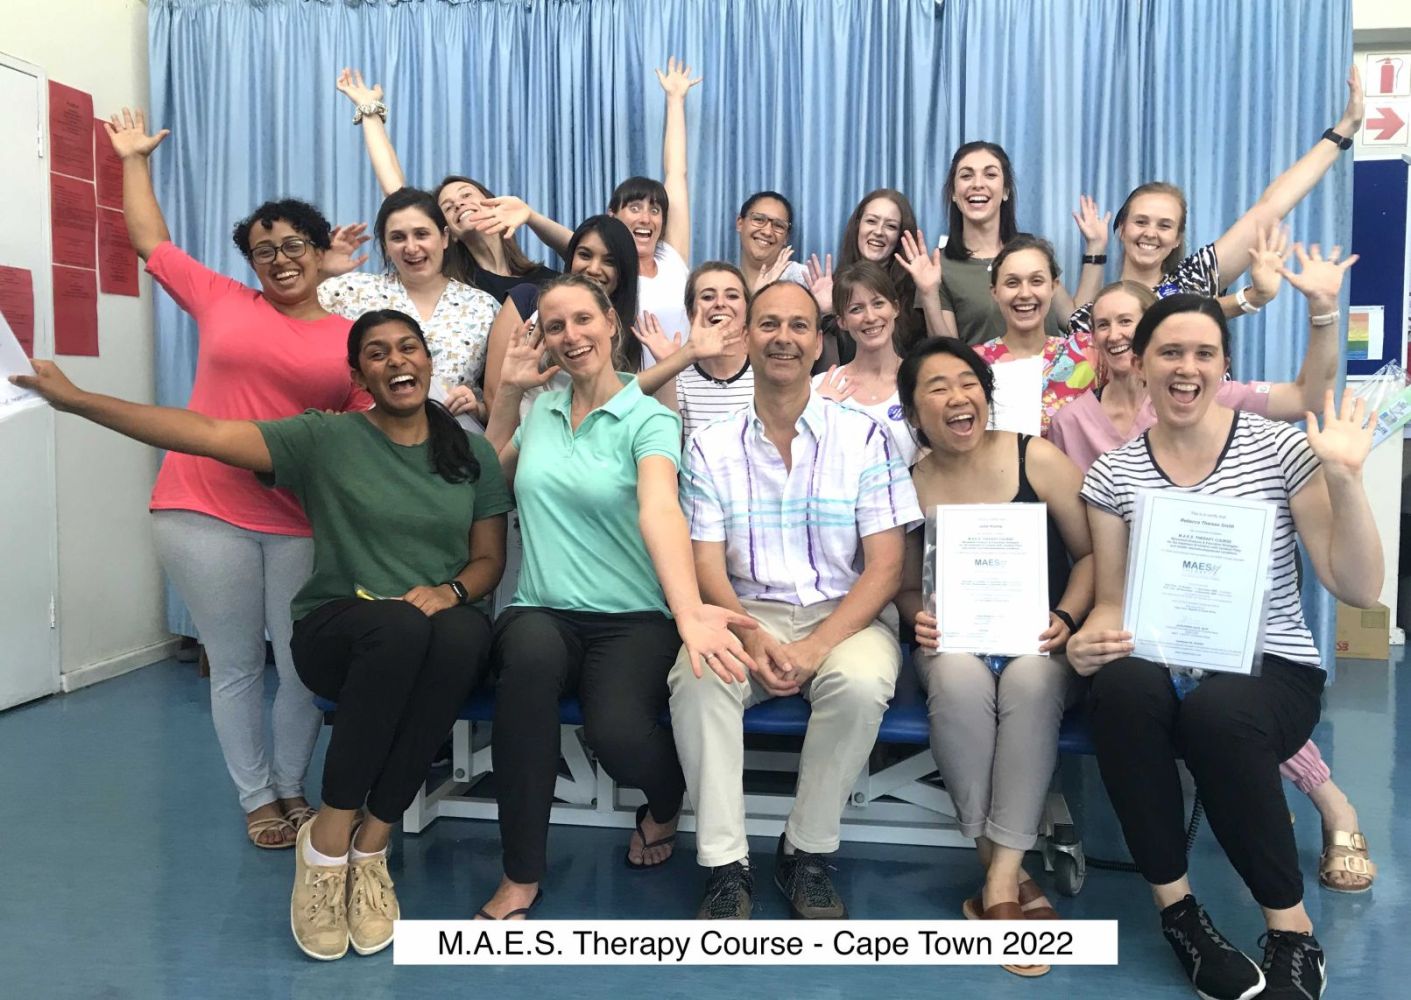 M.A.E.S. Therapy Foundation Course for Paediatric Therapists (PT,OT), Cape Town 2022